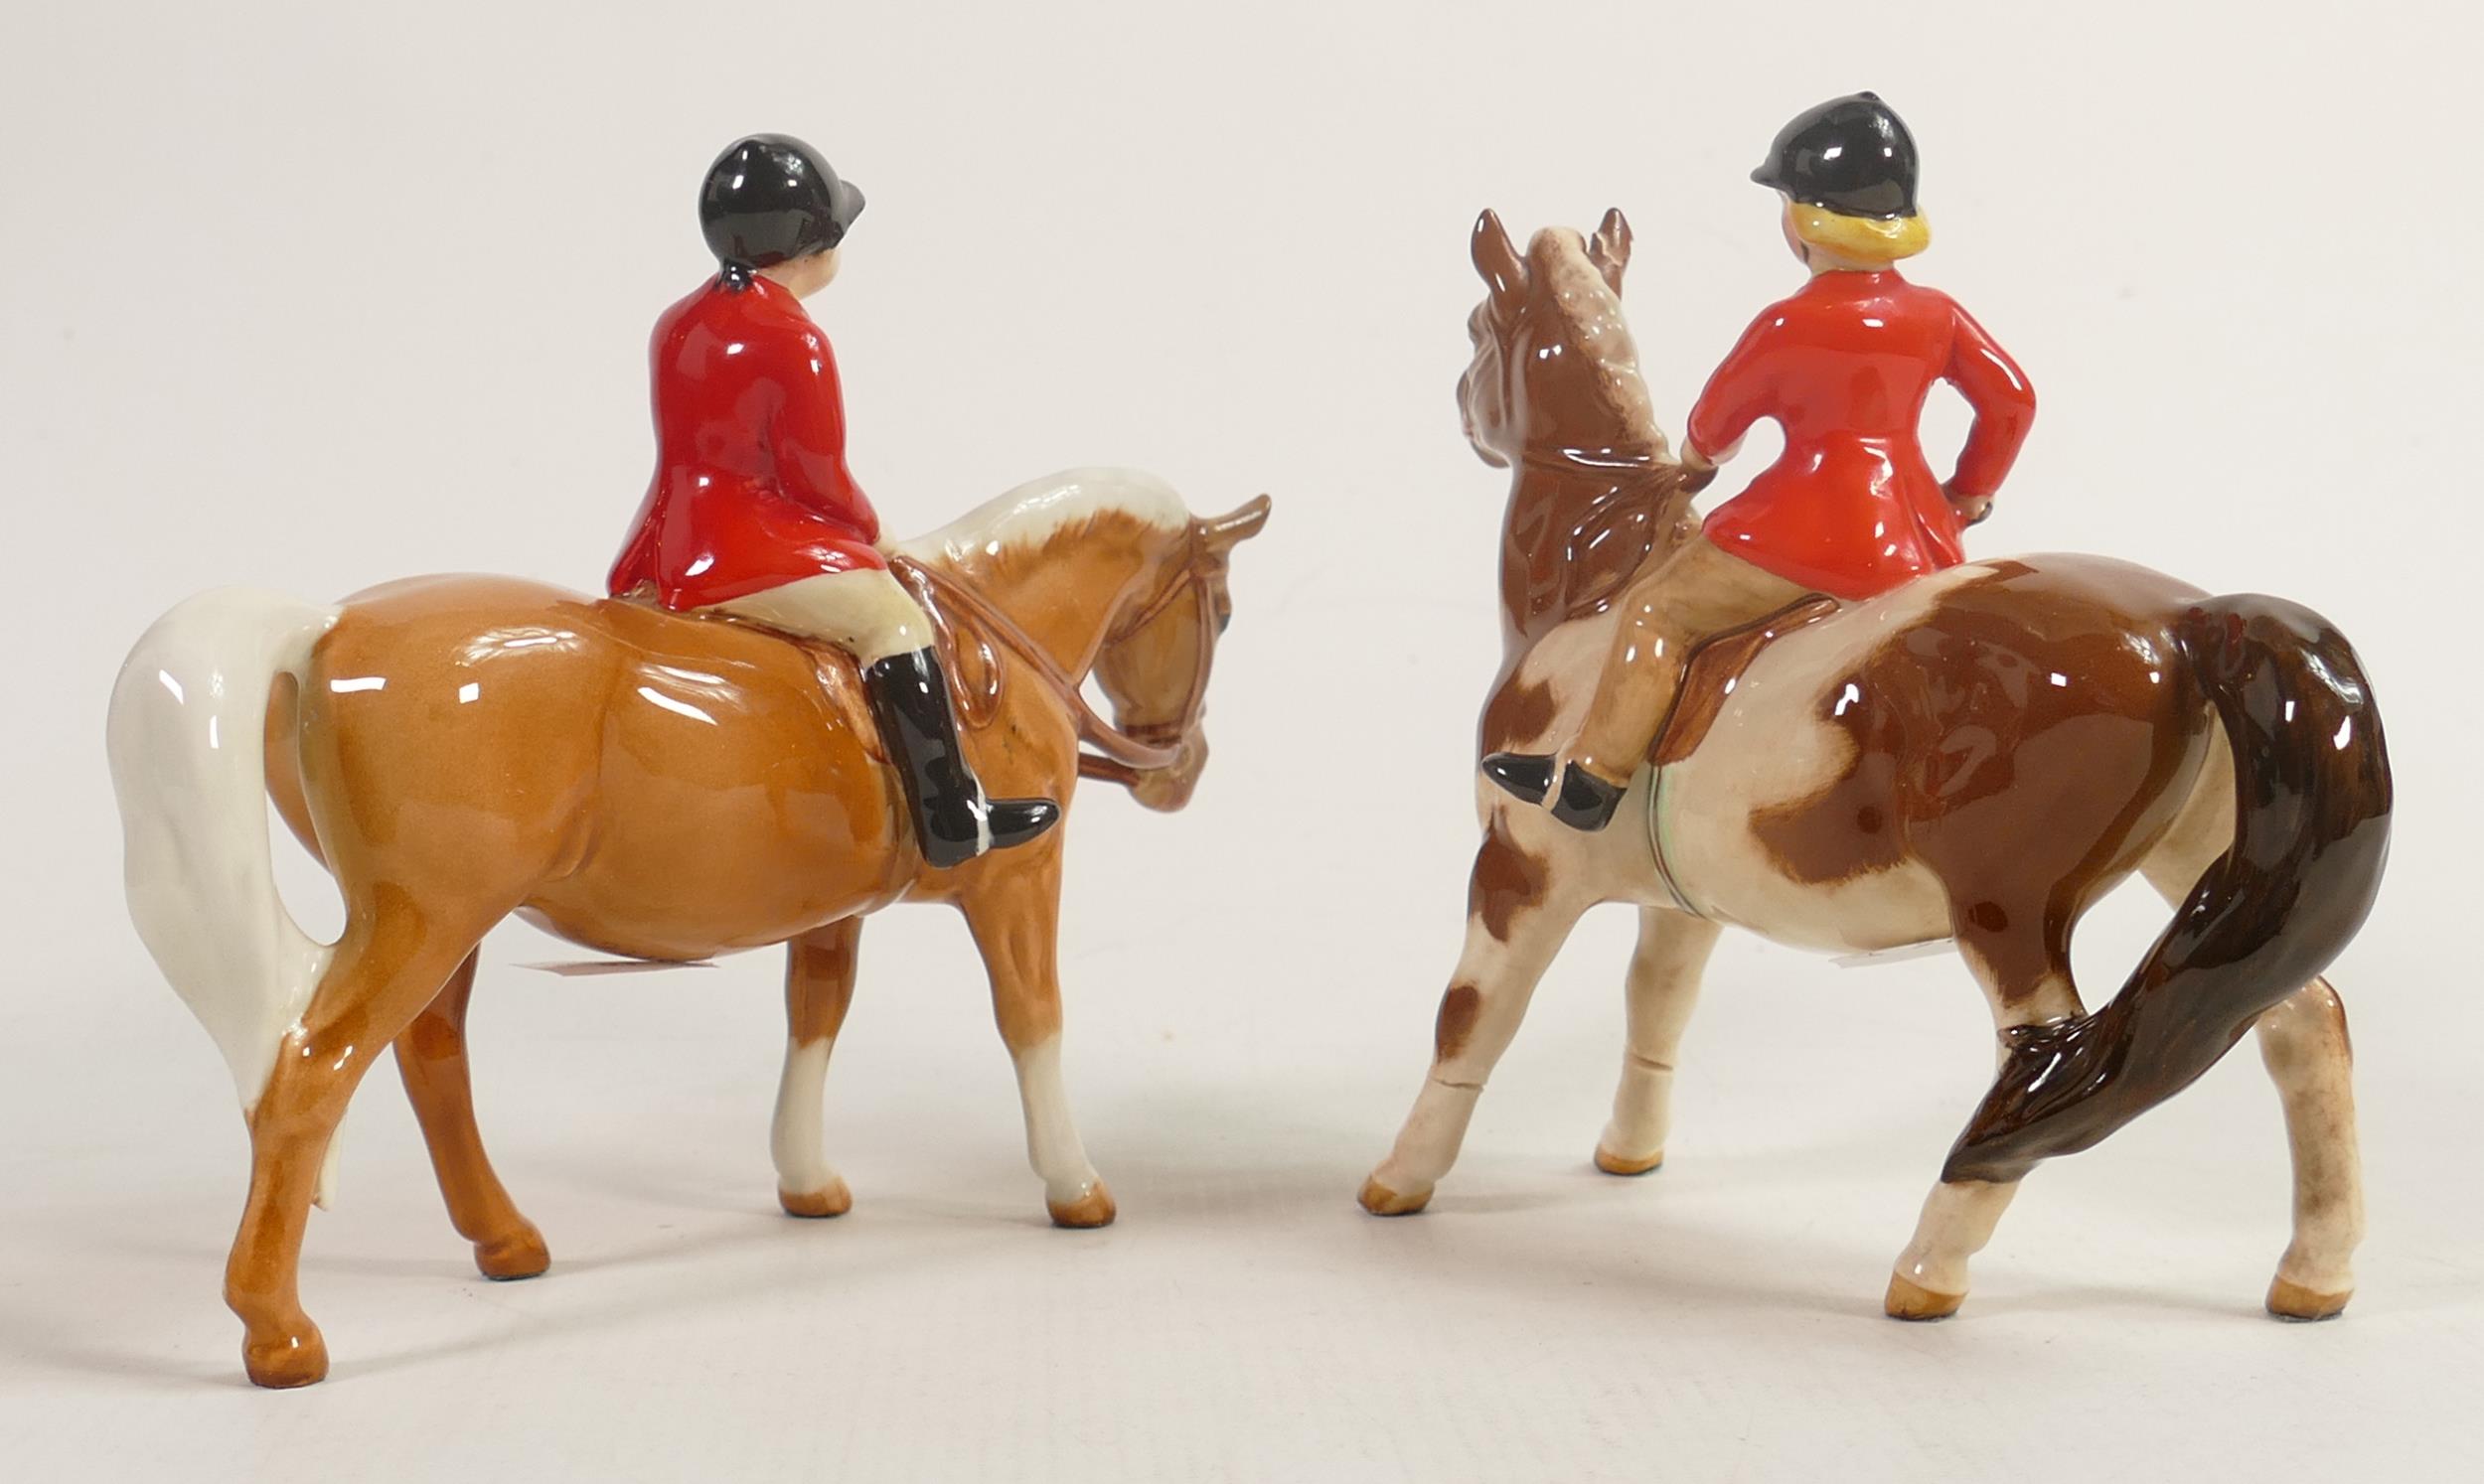 Beswick girl on Skewbald pony 1499, together with a boy on pony 1500. Both with red jackets. Girl on - Image 3 of 3